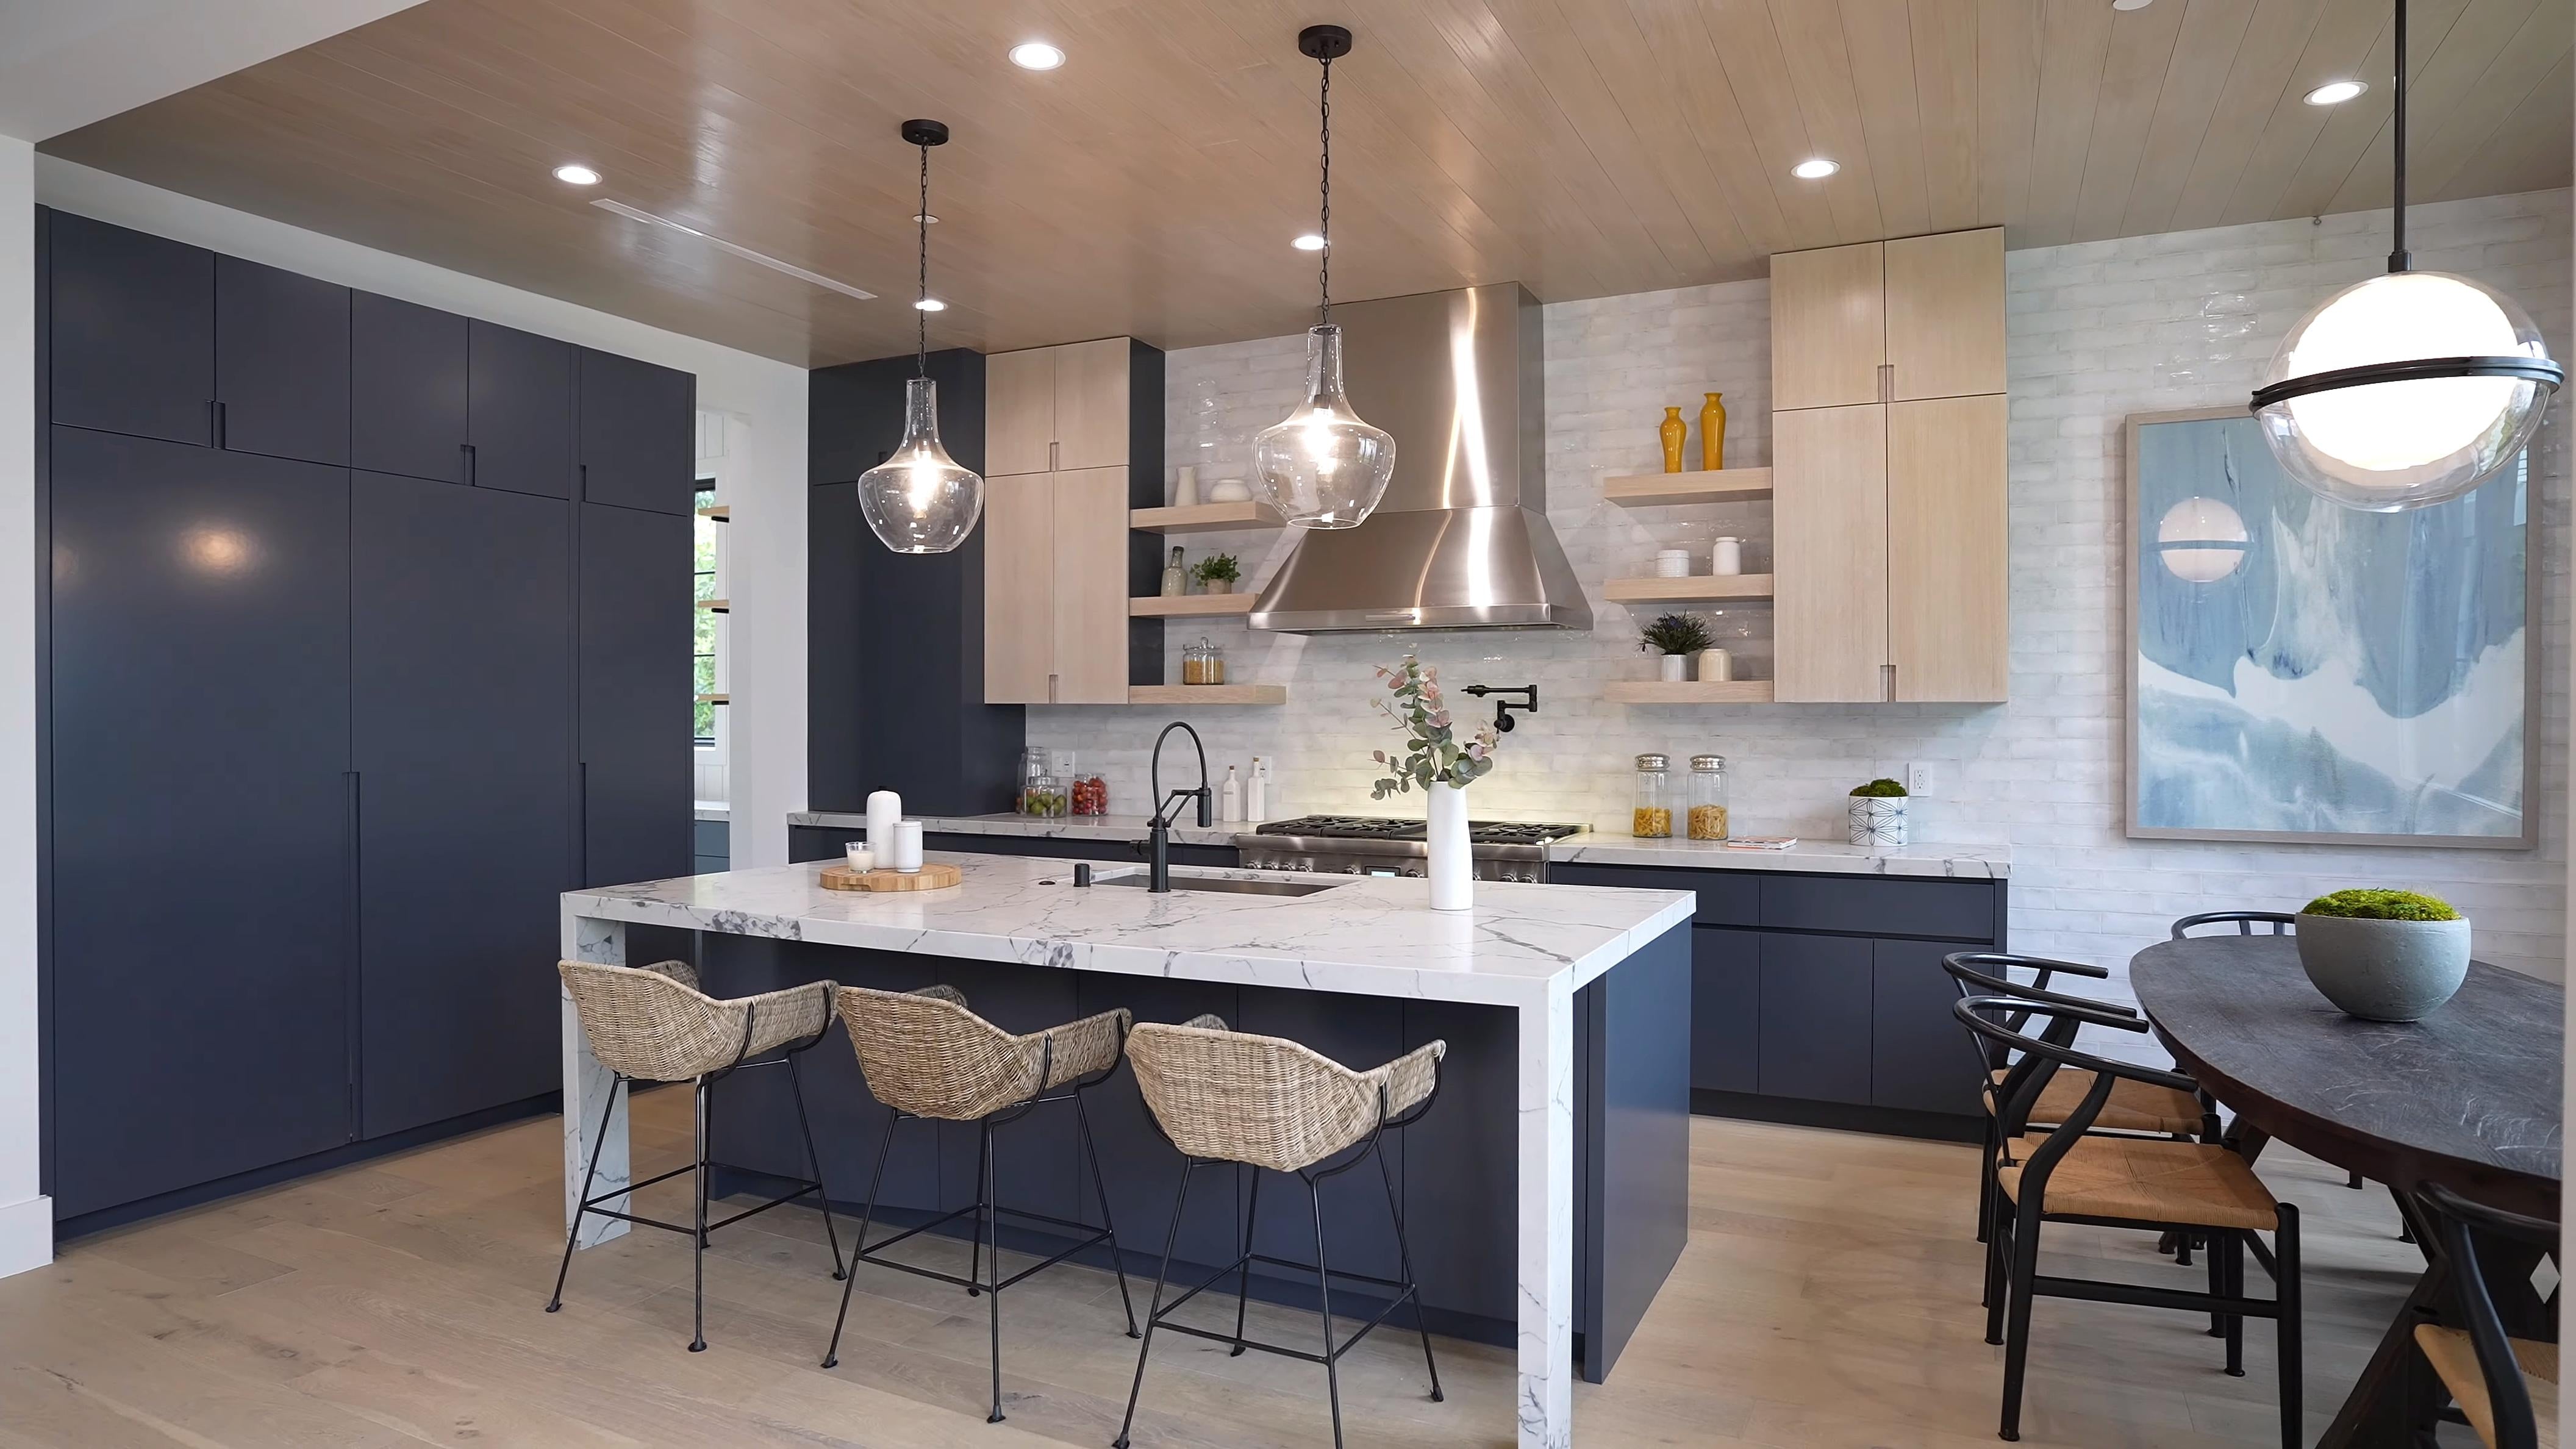 TOP 6 Reasons That Will Make You Fall In Love With 2021 Kitchen Design Trends IV